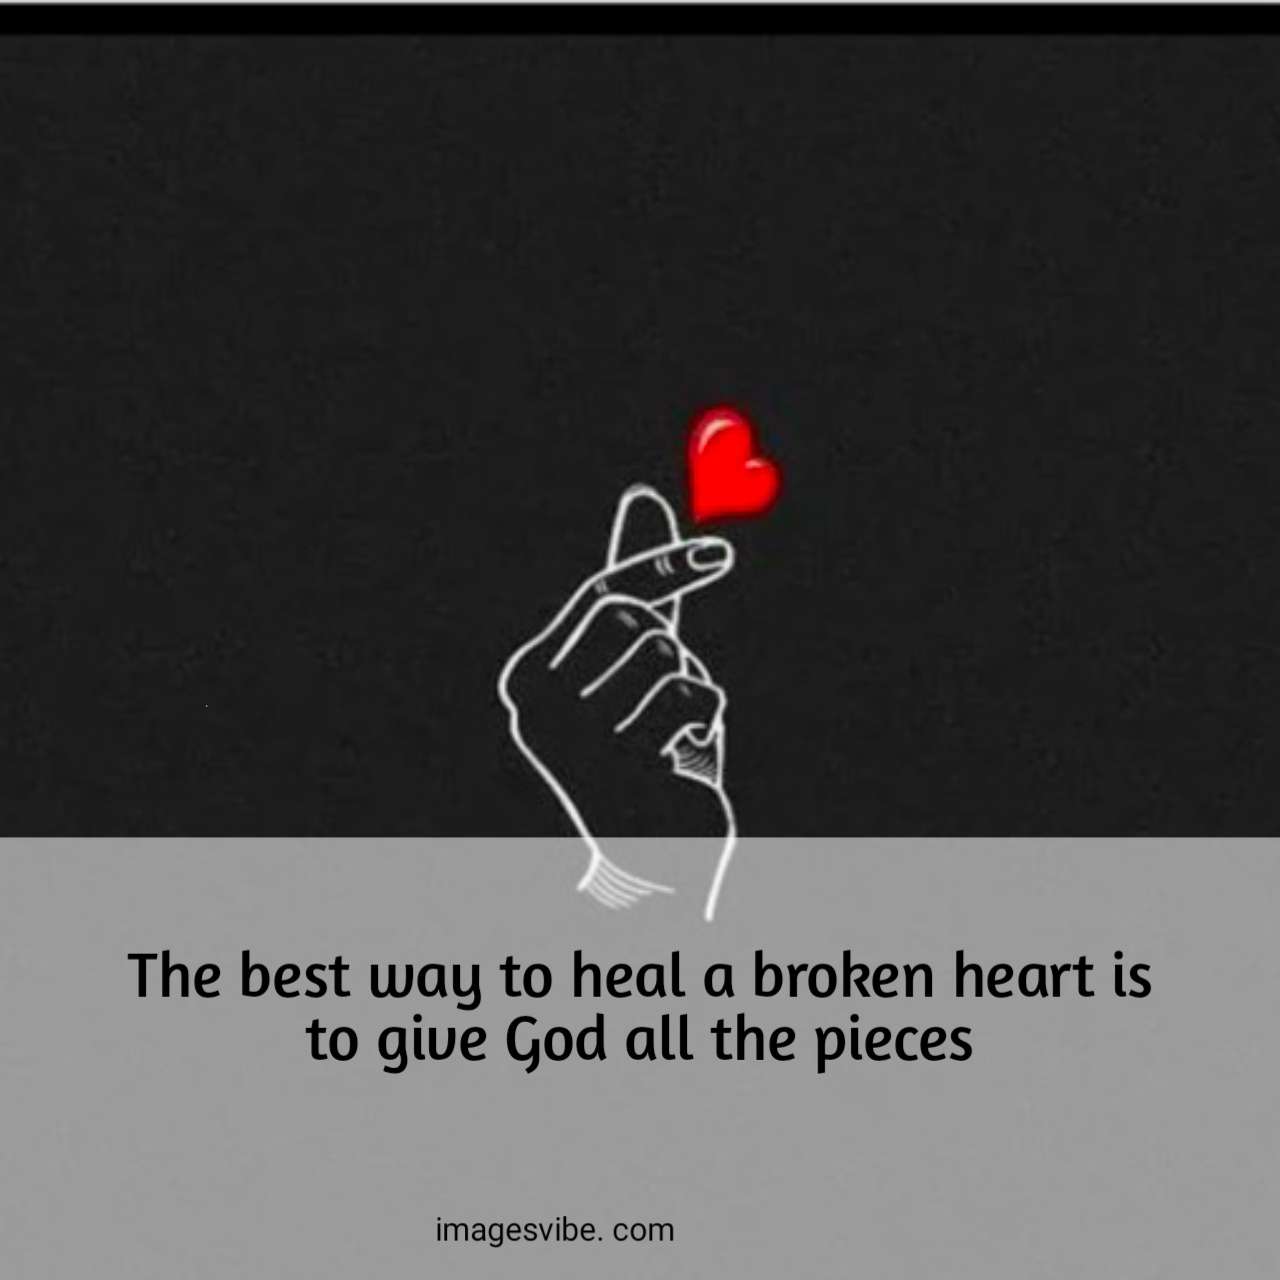 Best 30+ Images With Quotes About Heart Broken - Images Vibe